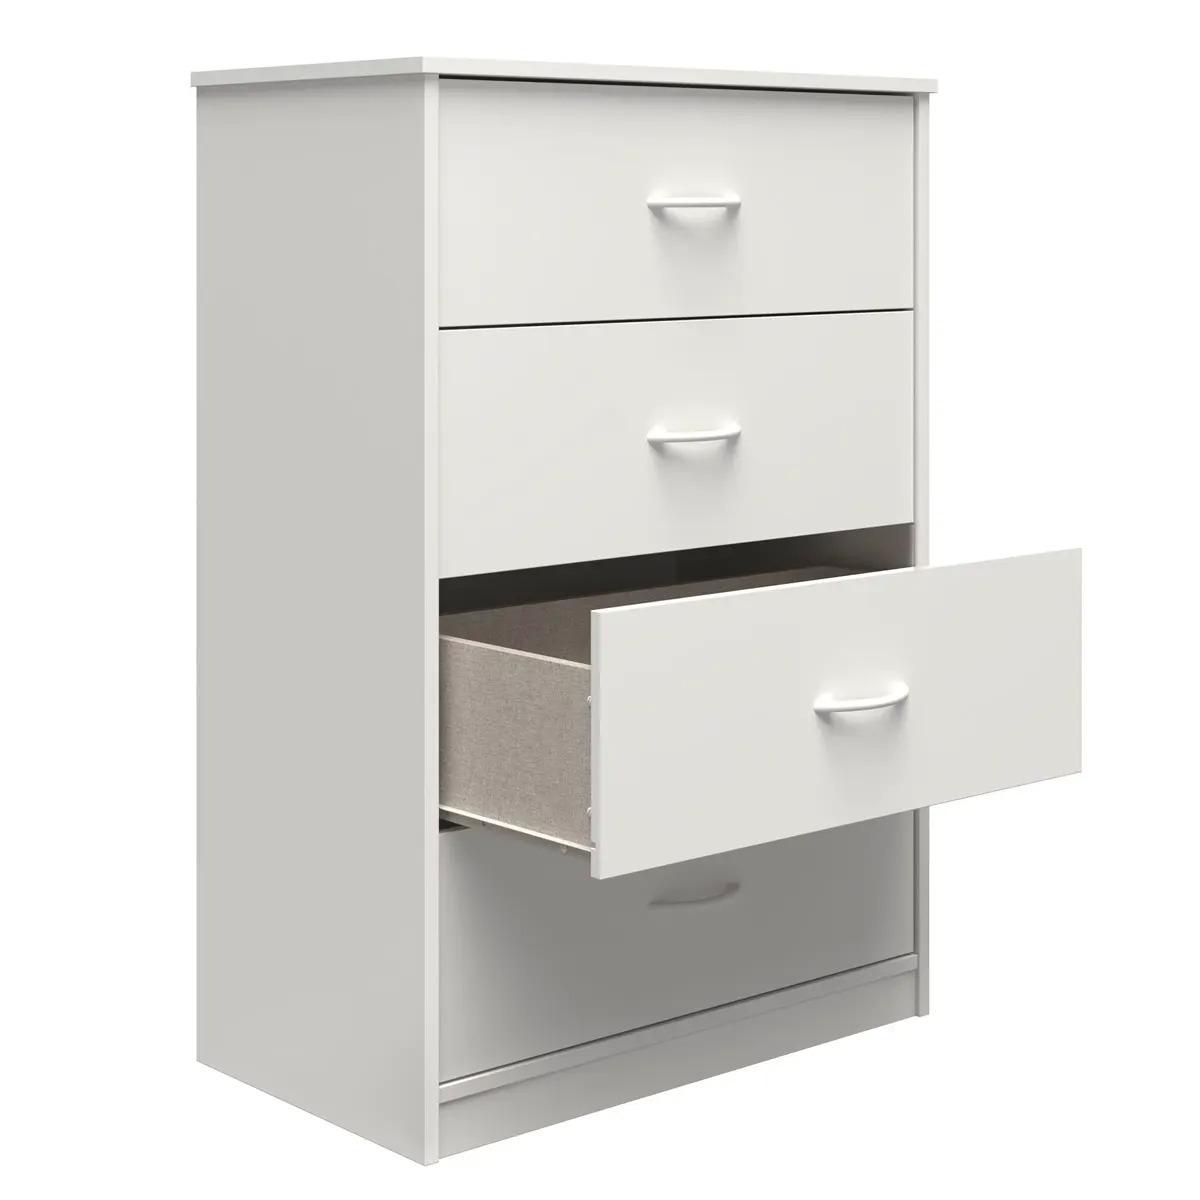 Mainstays Classic 4 Drawer Dresser for $49 Shipped